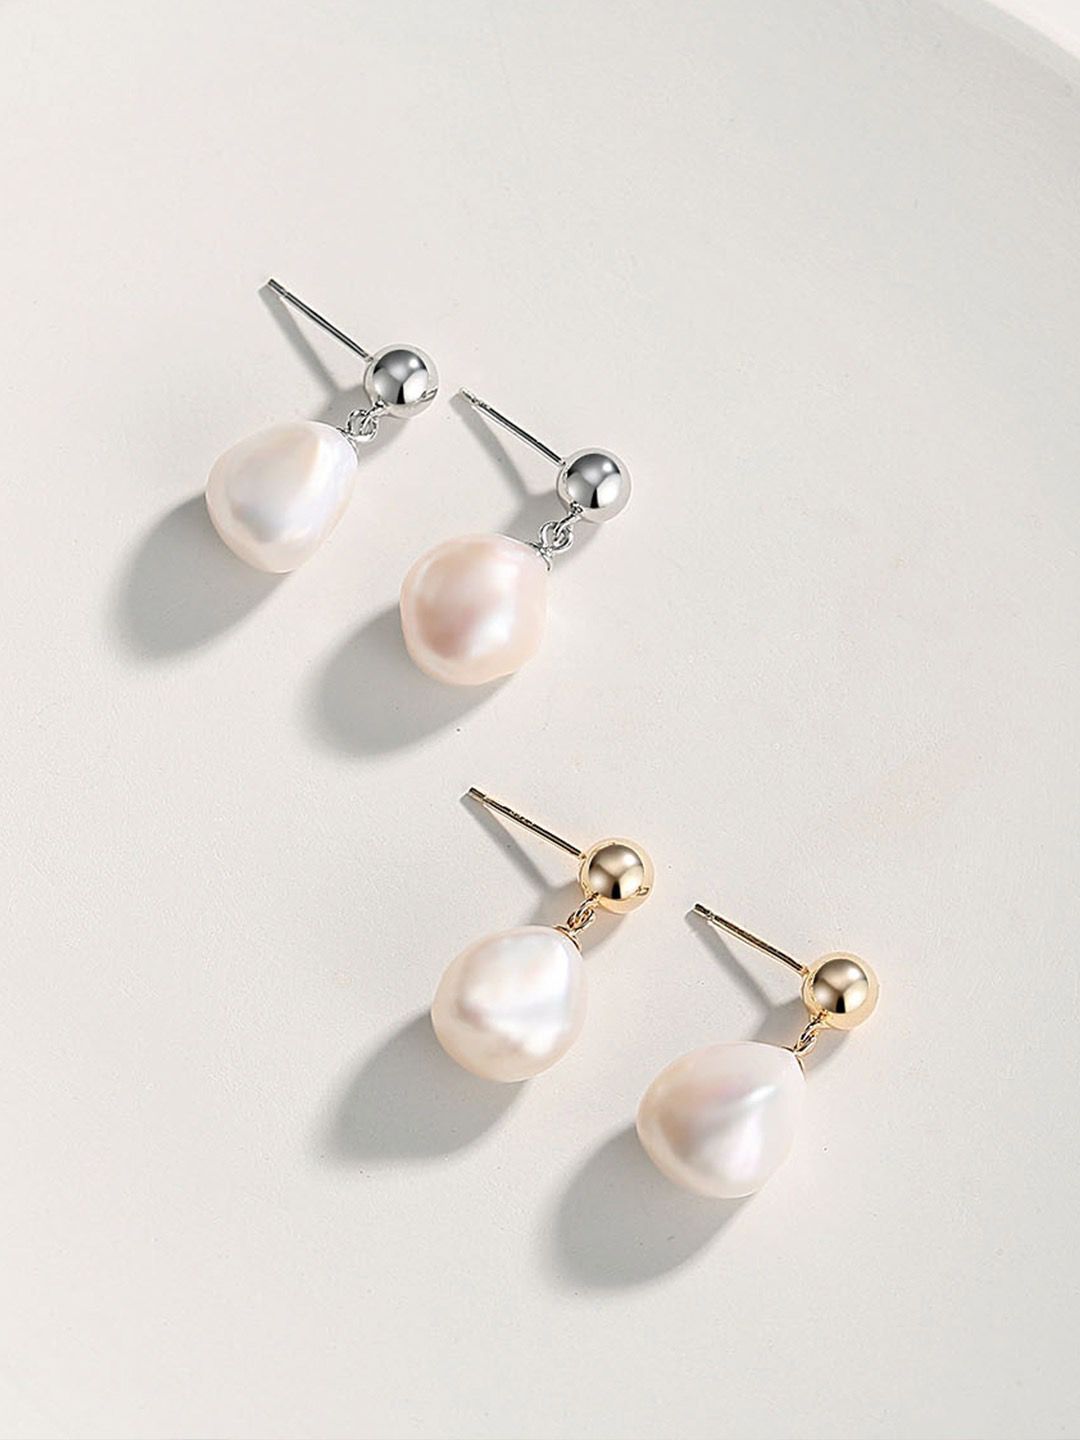 Our Organic Pearl Earrings feature naturally formed freshwater pearls and are handcrafted by skilled artisans. The earrings are hypoallergenic and a sustainable option for those looking for eco-friendly jewelry.